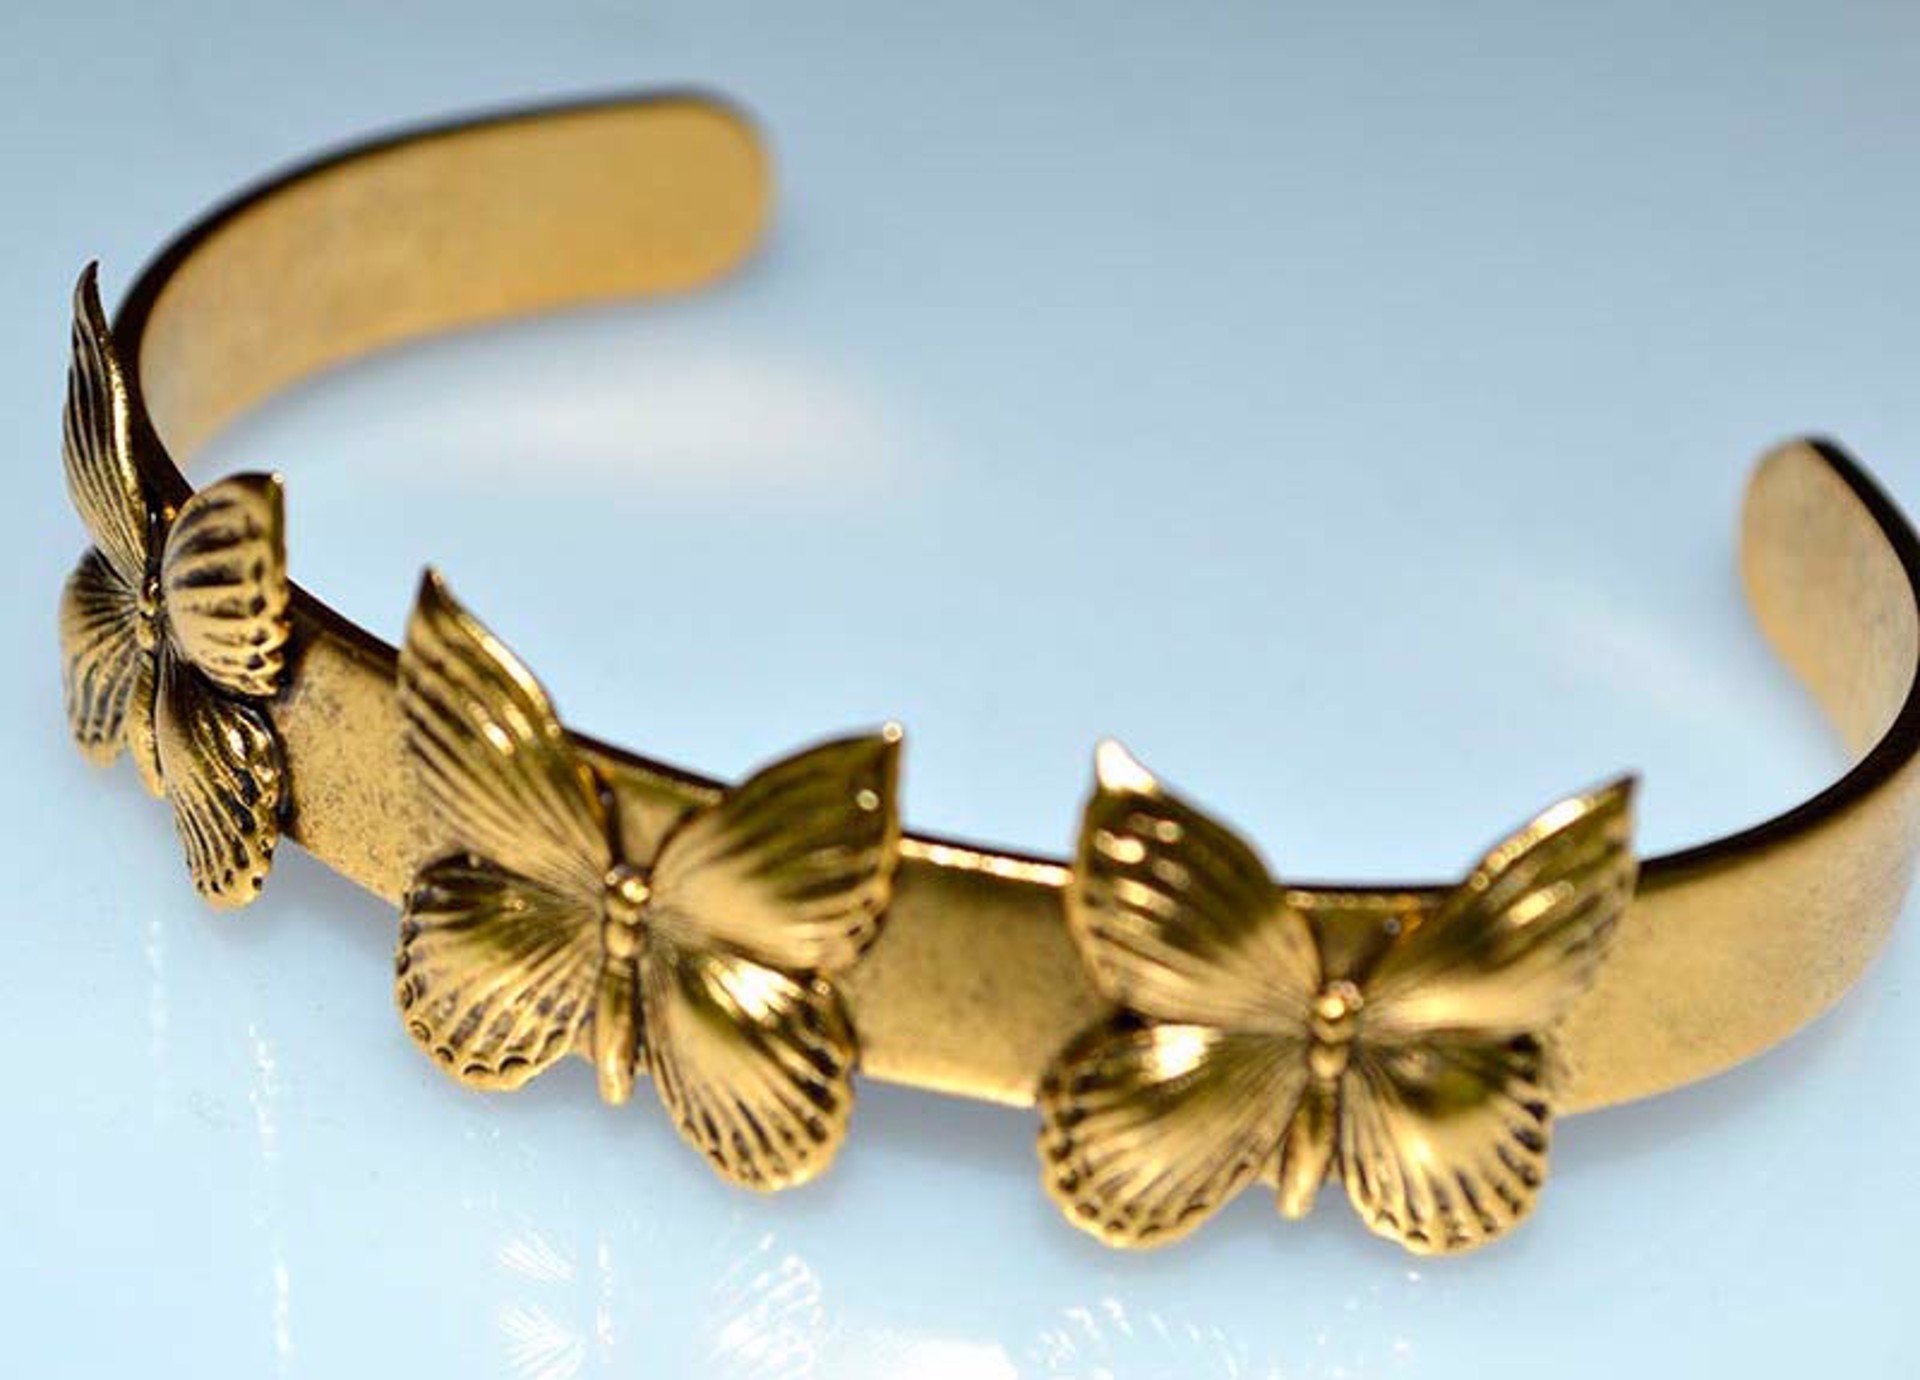 Antiqued Brass Butterly Band by Elaine Coyne